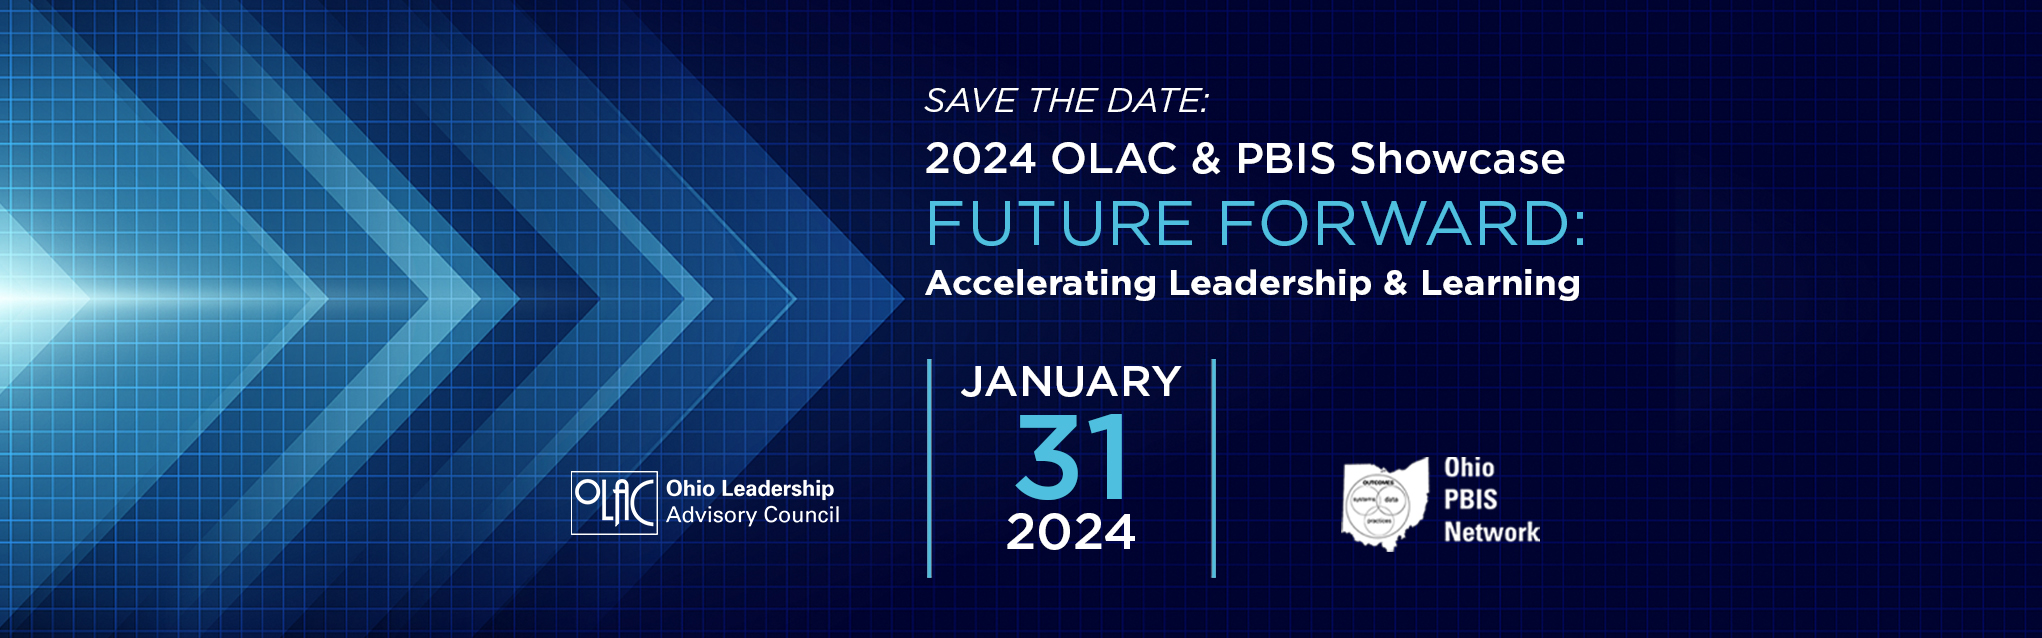 Save the Date: January 31, 2024 OLAC & PBIS Showcase